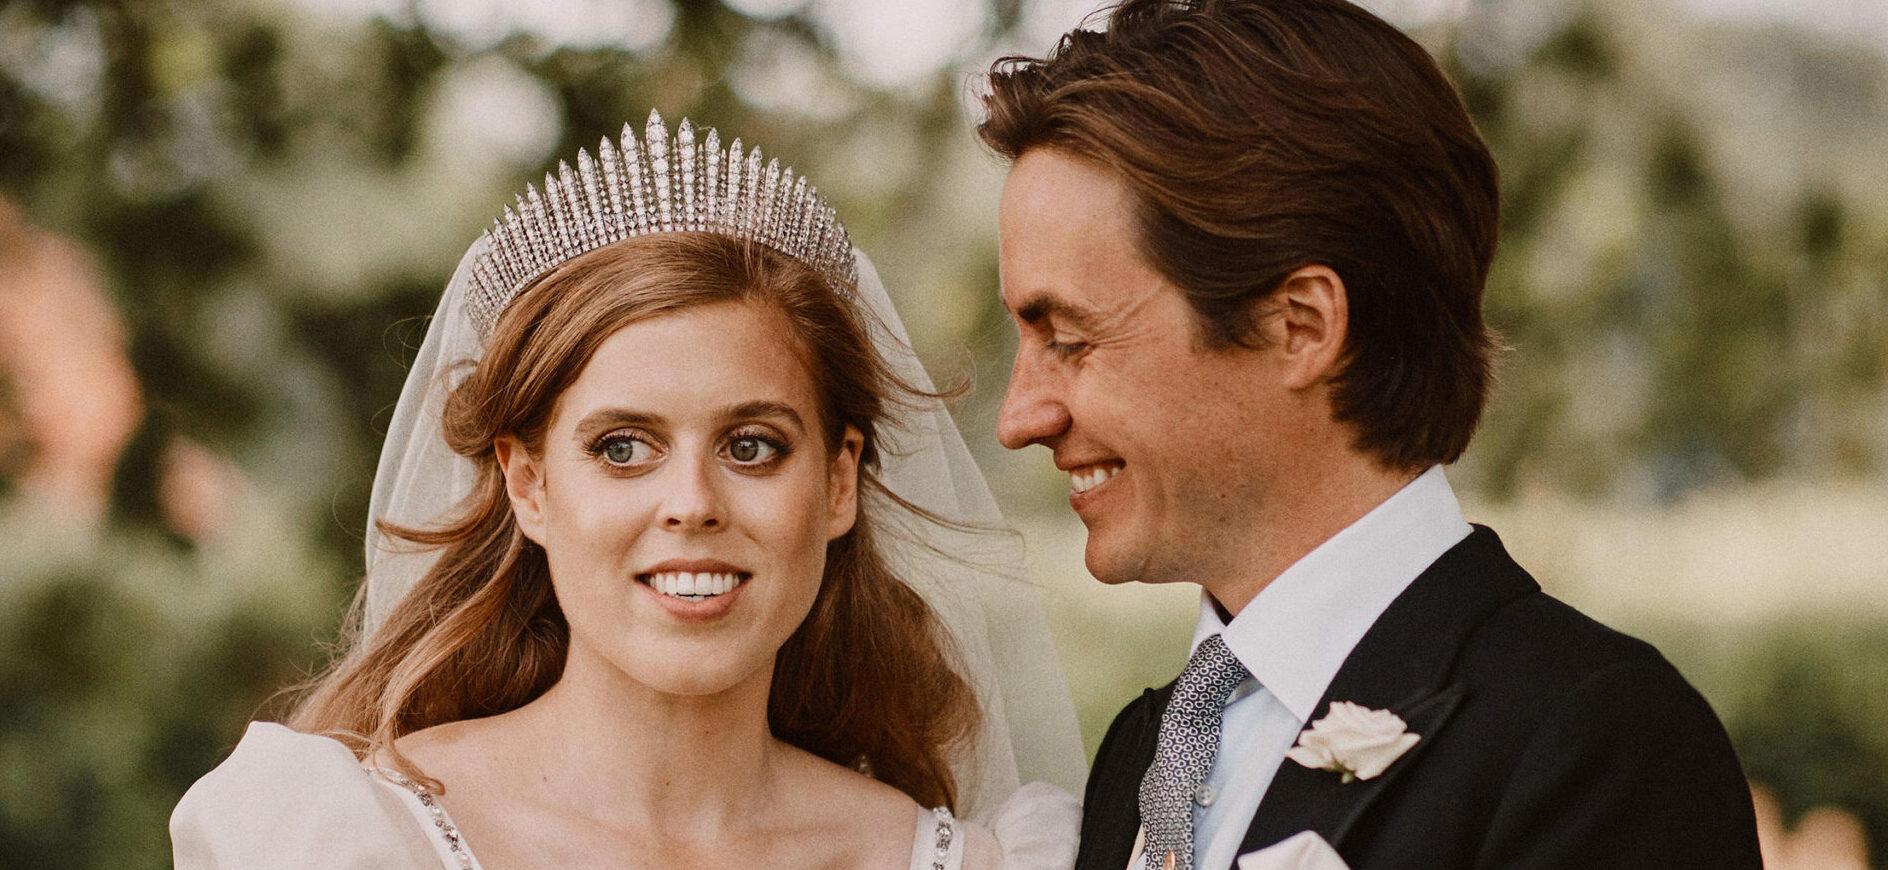 Princess Beatrice And Husband Edoardo Mapelli Mozzi Reveal Name Of Daughter And It Honors The Queen